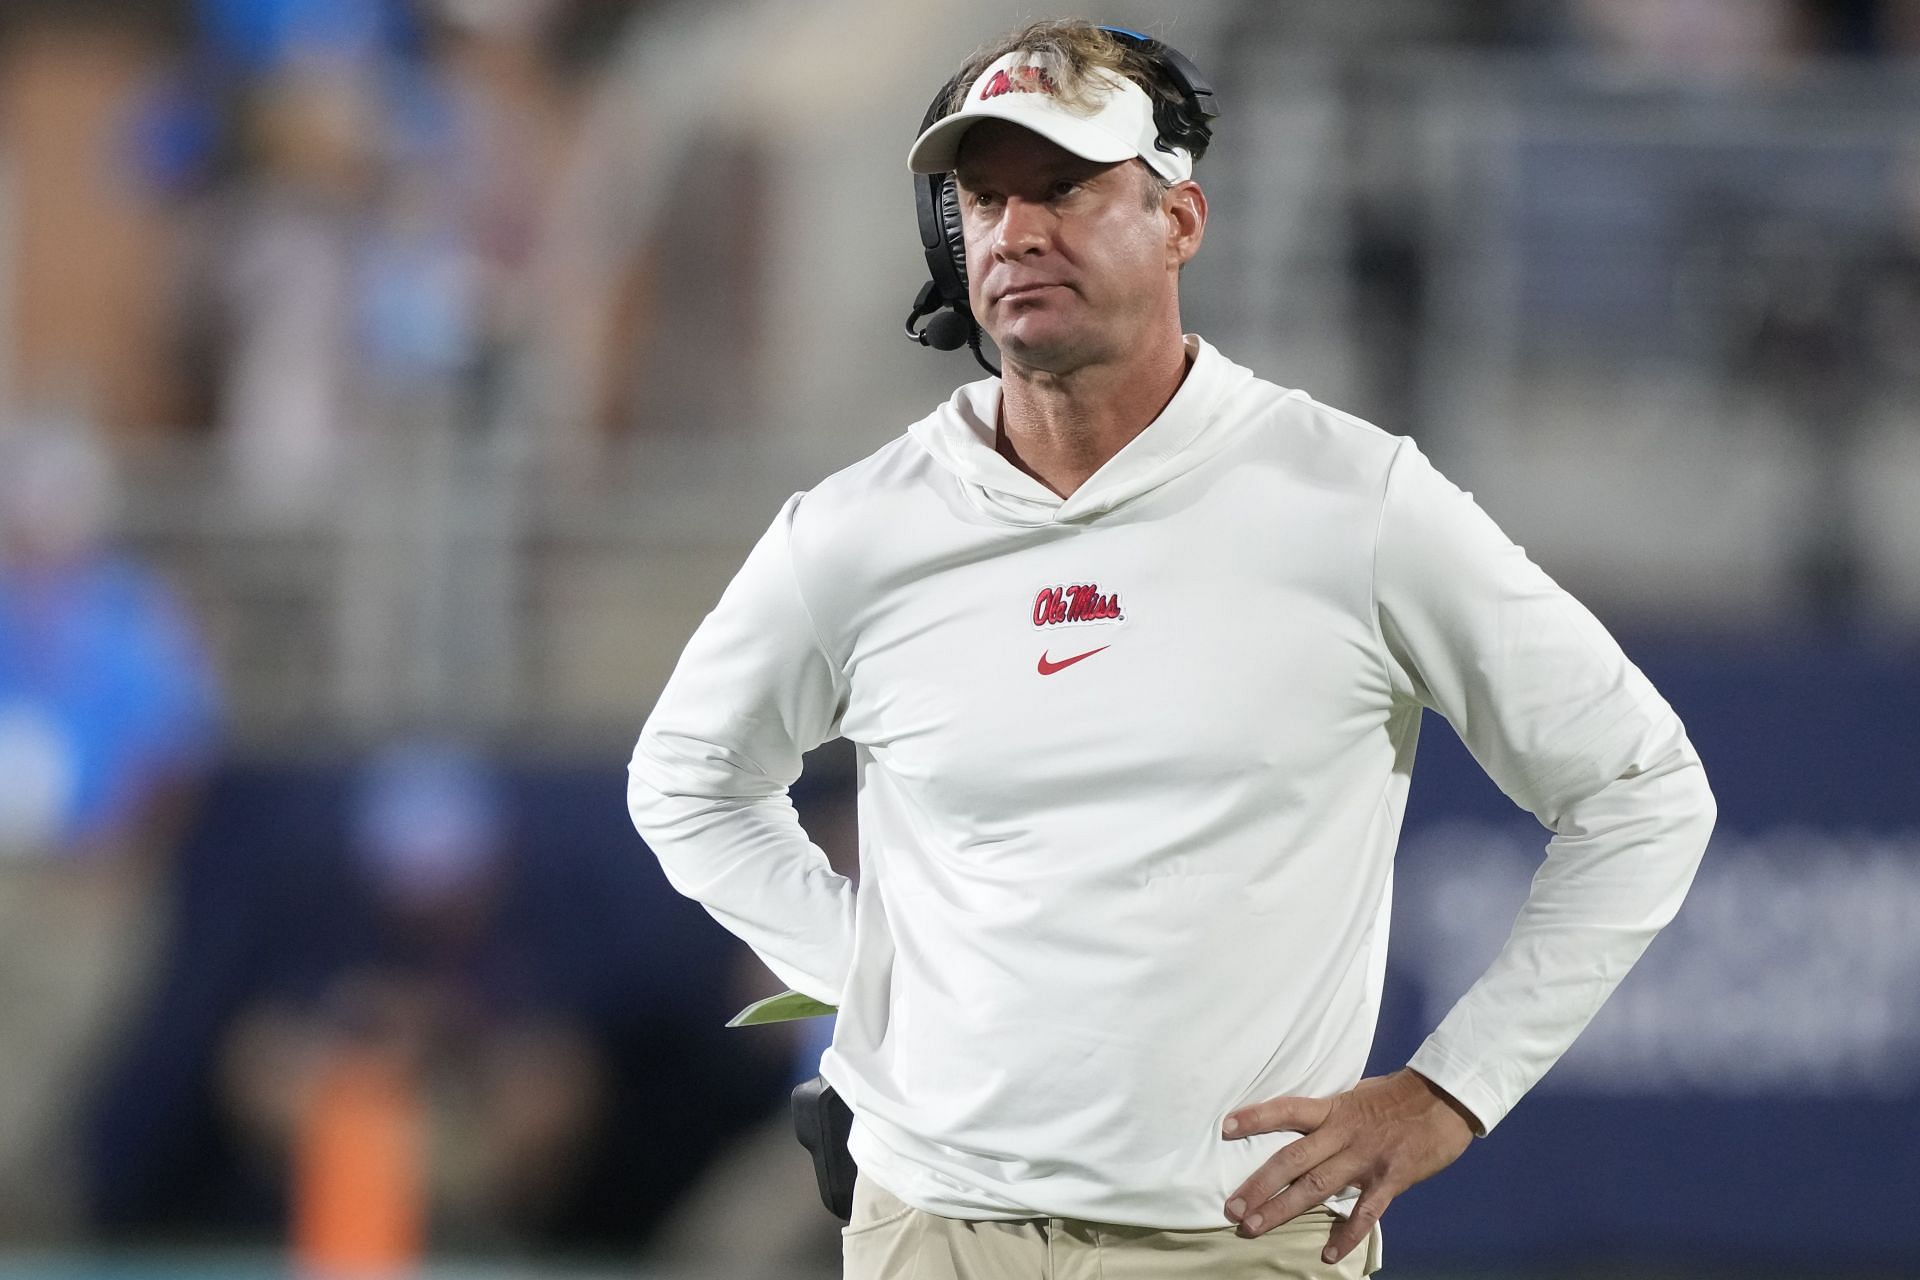 Audio tape of Lane Kiffin threatening to kick out DT DeSanto Rollins from Ole Miss goes public after heated exchange on “mental health”